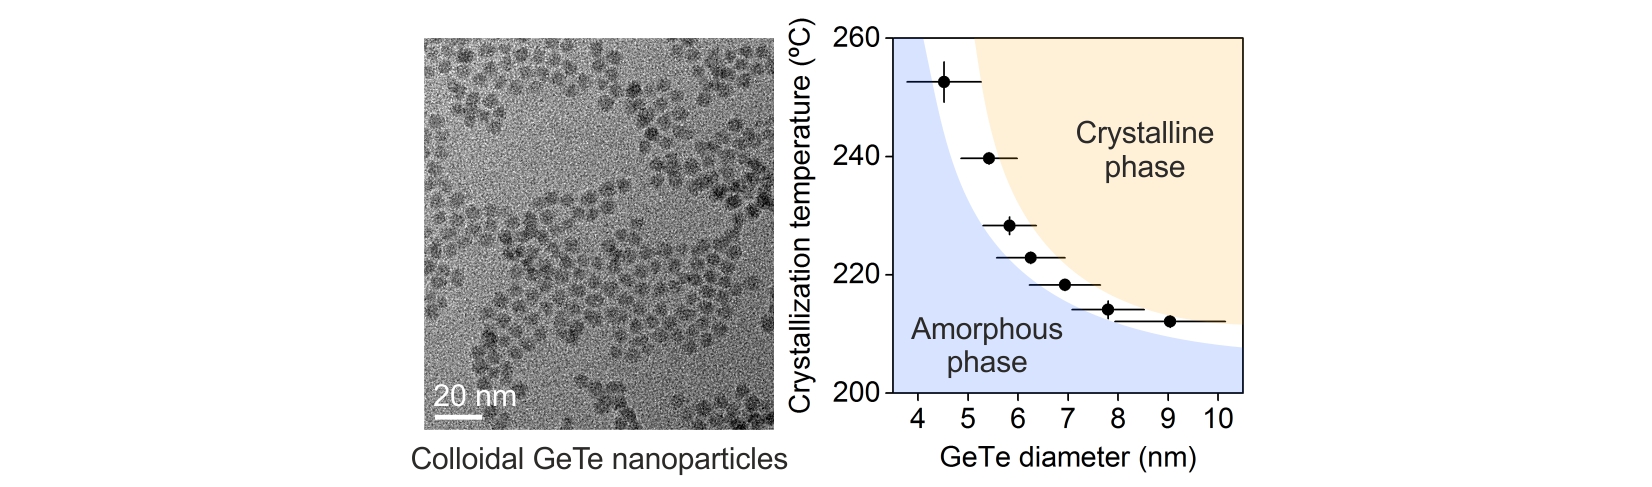 Colloidal Phase-Change Materials: Synthesis of Monodisperse GeTe Nanoparticles and Quantification of Their Size-Dependent Crystallization